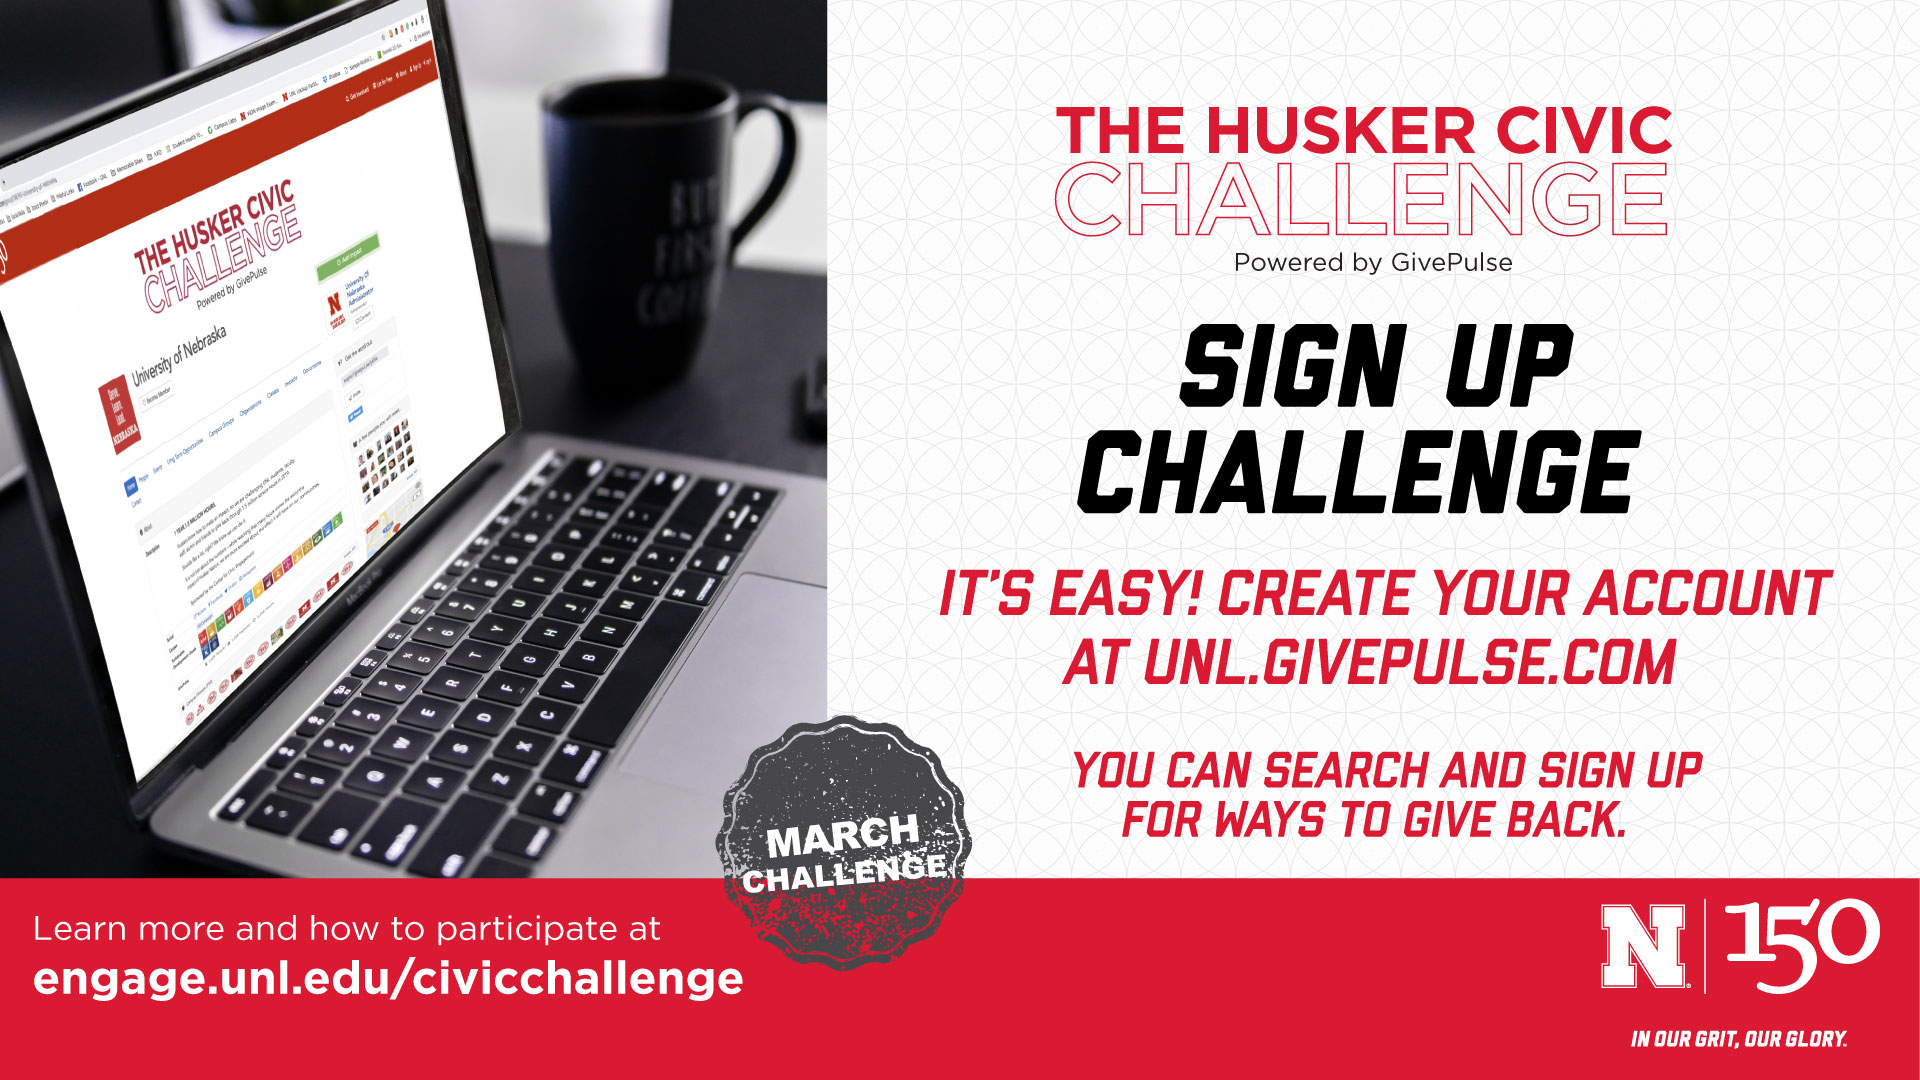 Sign up to Givepulse and serve now!